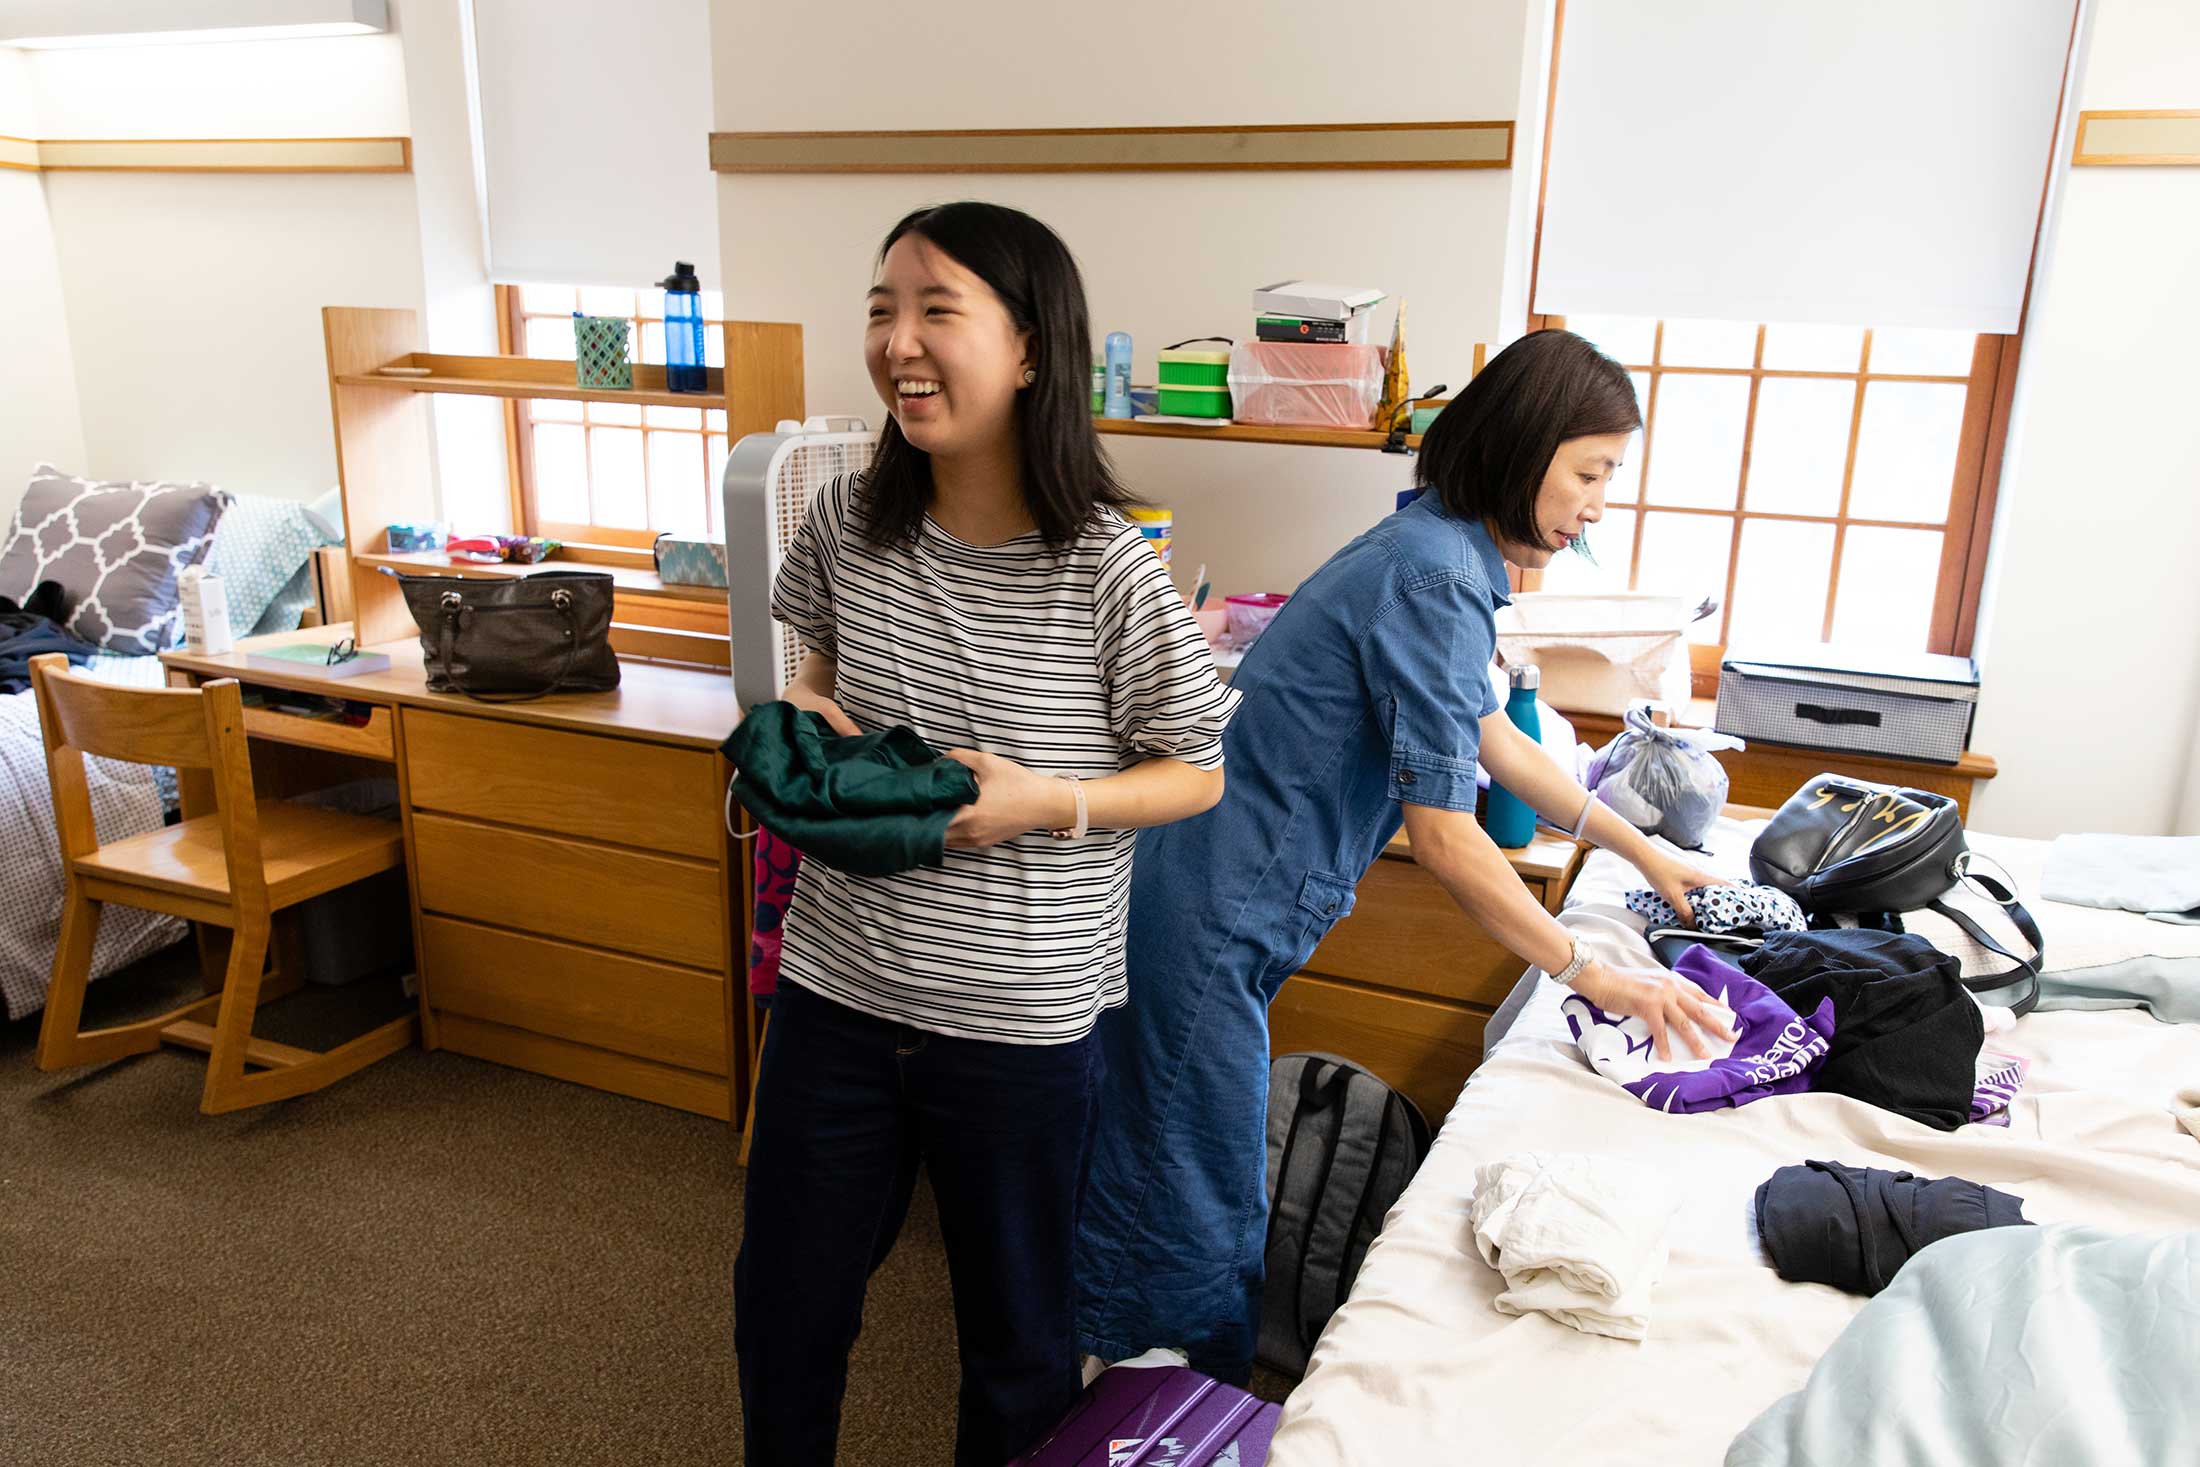 A new student unpacks her belongings in the residence hall with the help of her mother